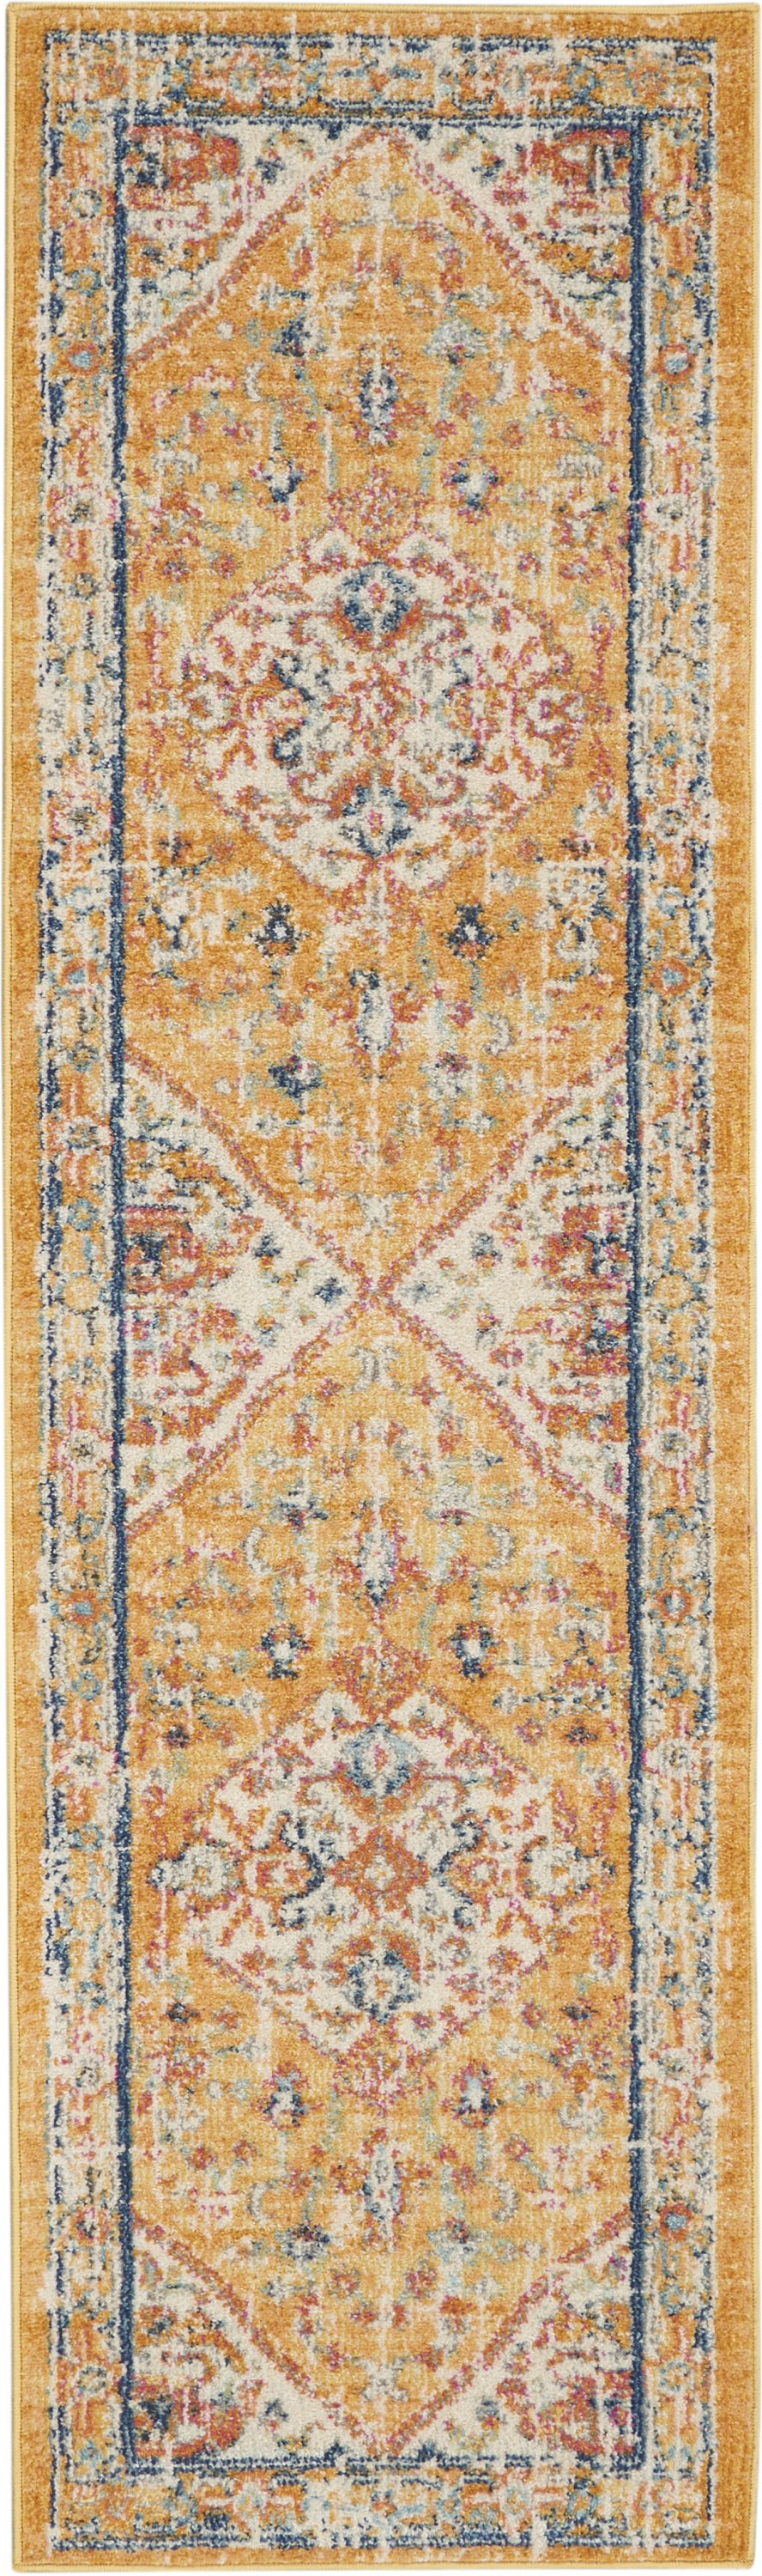 8' Yellow And Ivory Dhurrie Runner Rug-385561-1